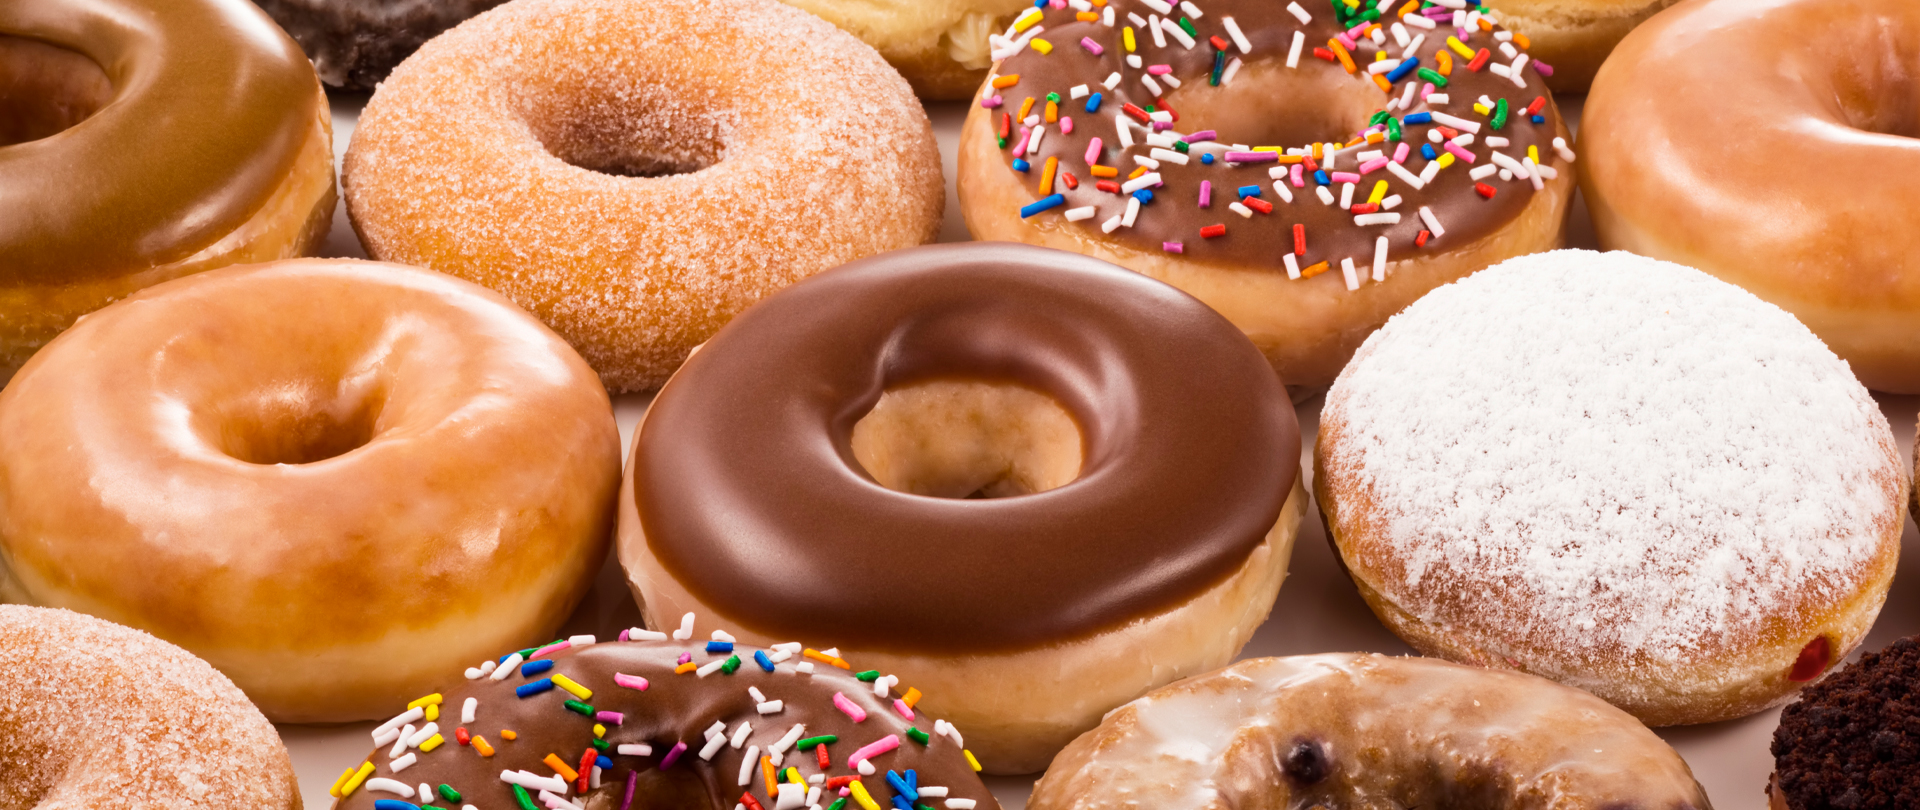 Donuts for Dads
Friday, June 17
Office lobby starting at 7 AM
